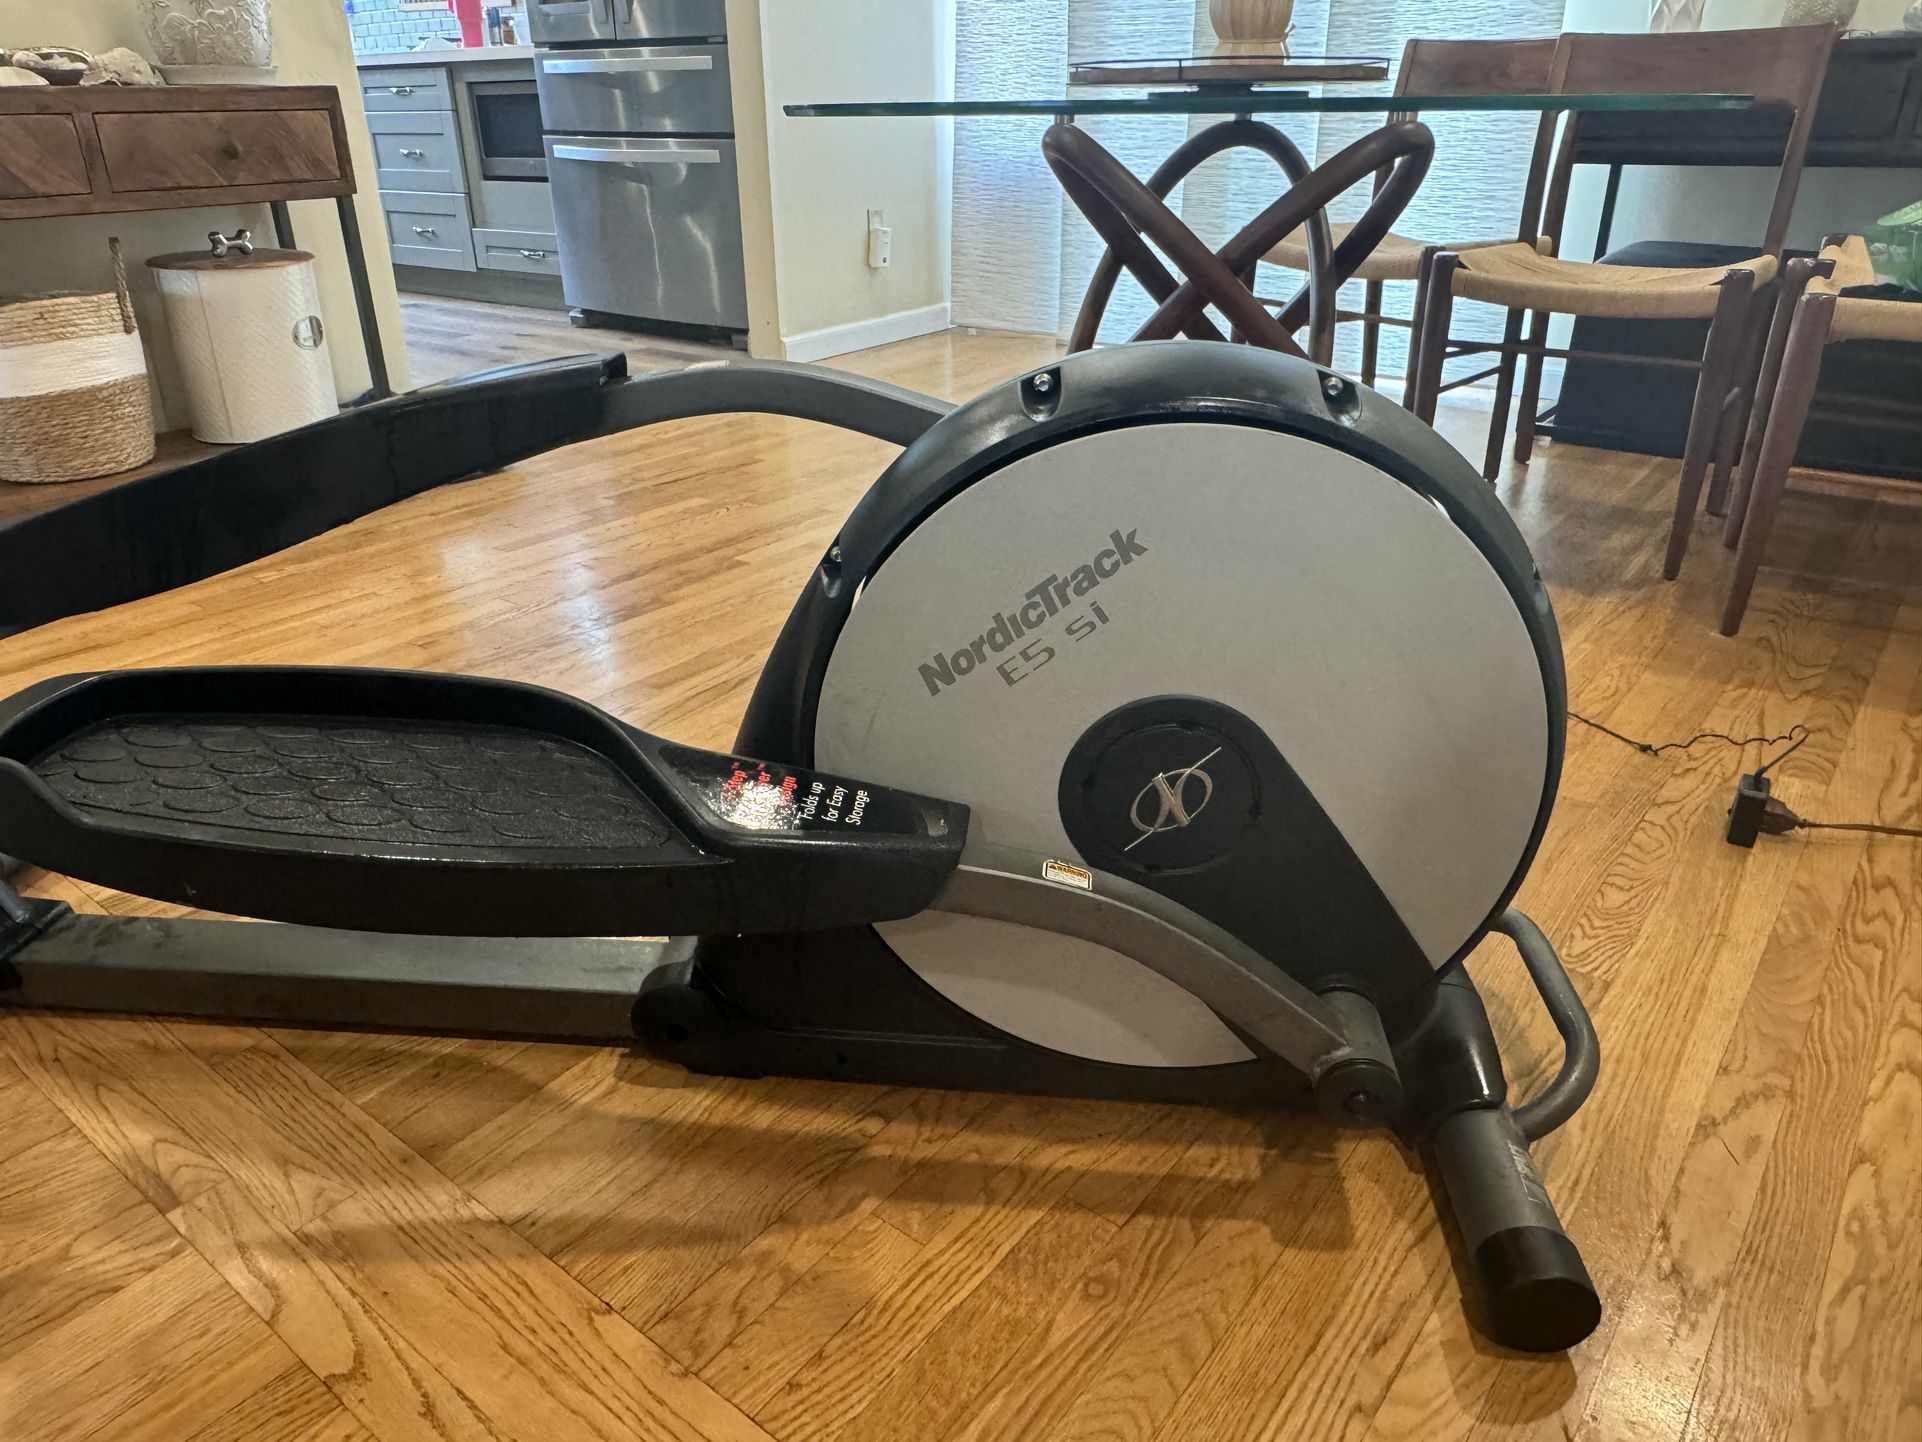 Used NordicTrack E5 SI Elliptical - Great working Condition  -  $125 or OBO